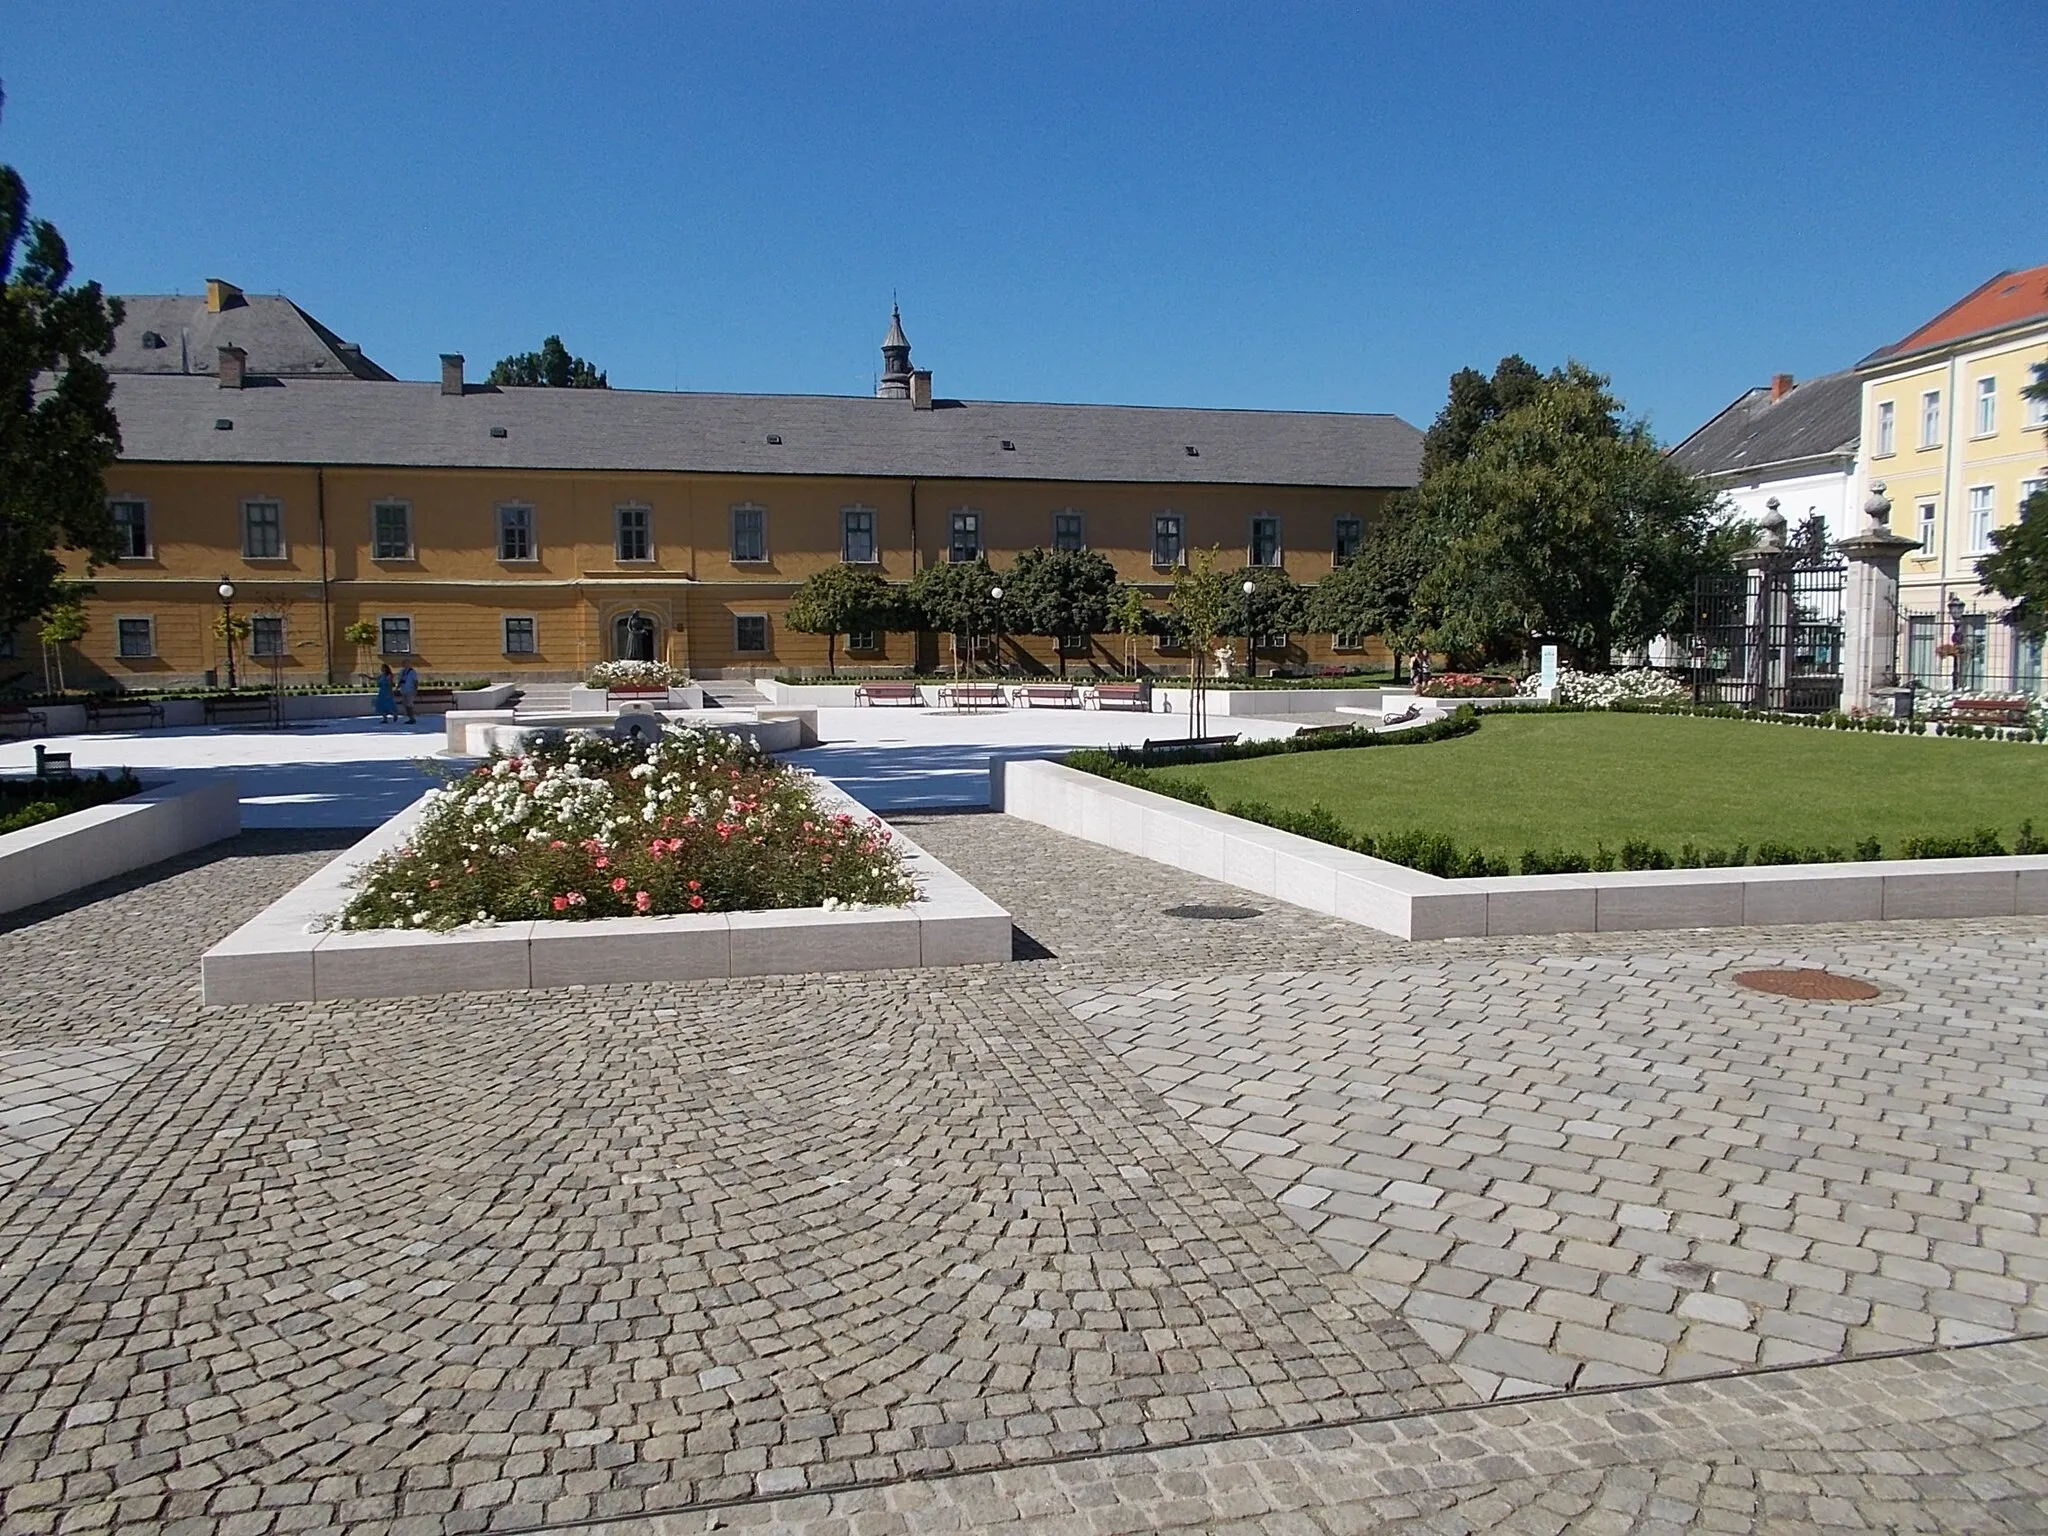 Photo showing: : Archiepiscopal Palace north wing across garden. - 1-3 Széchenyi Street, Eger, Heves County, Hungary.